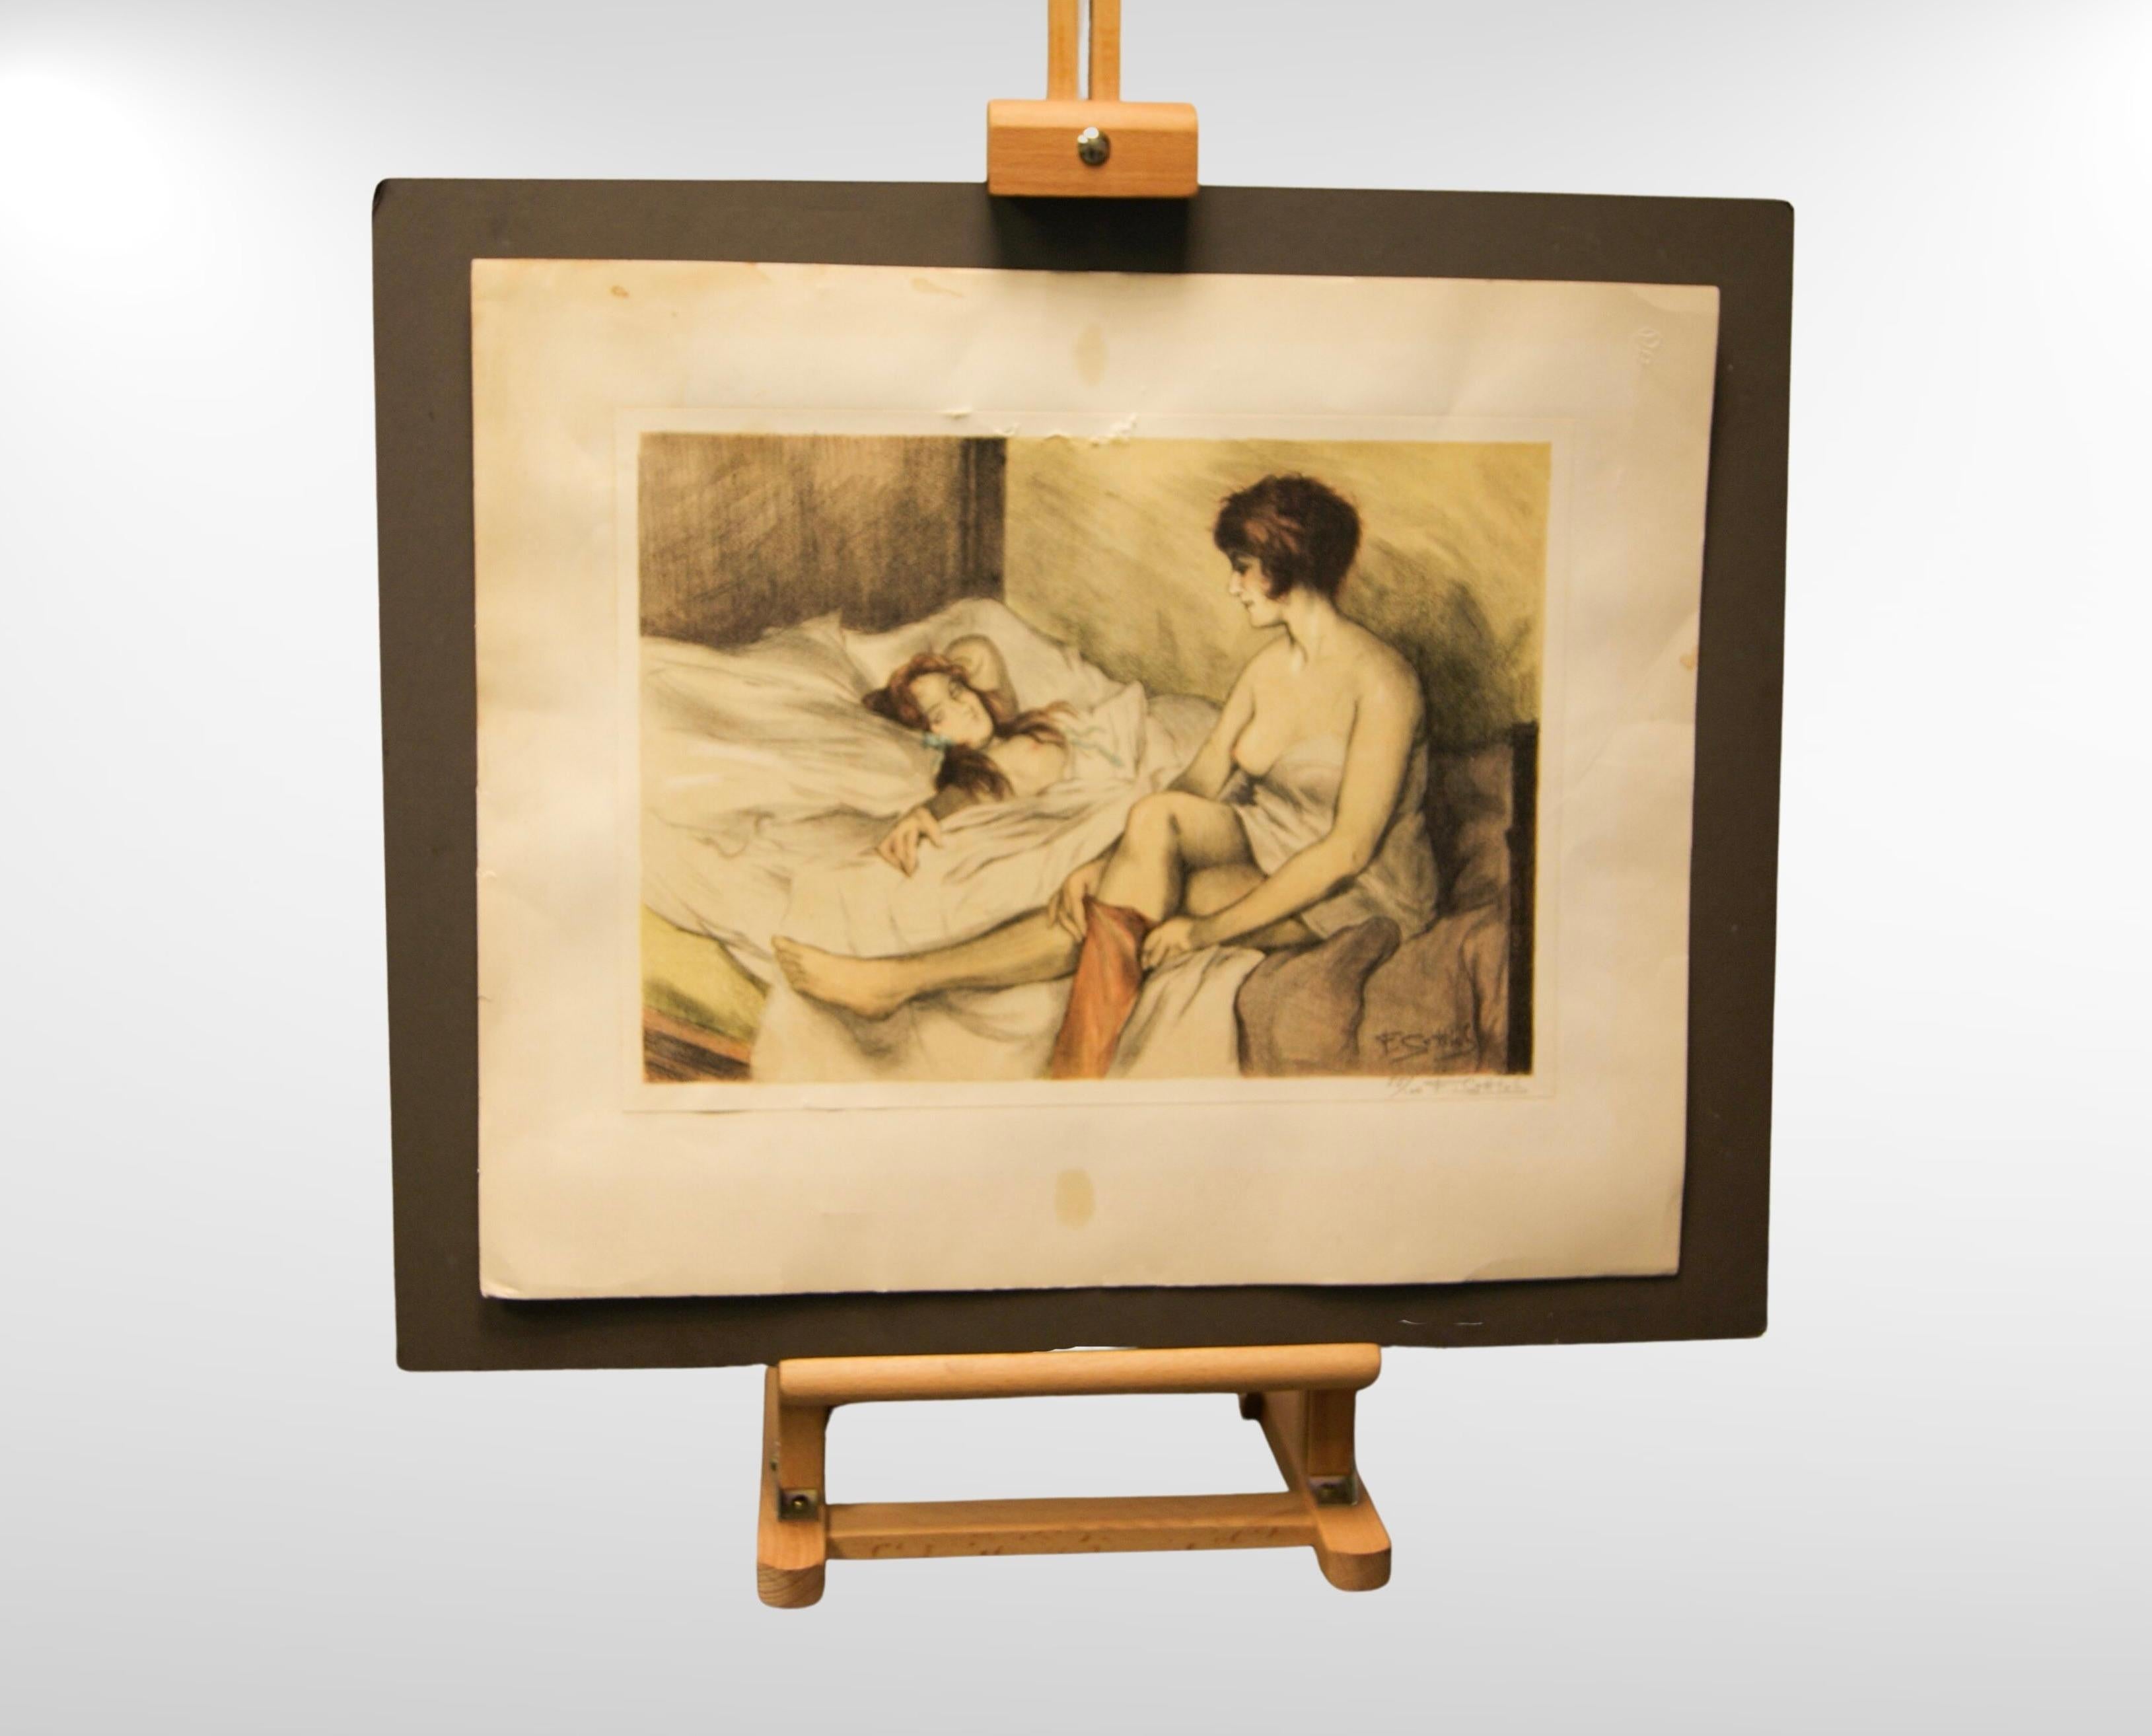 1930s Nude Lesbian Art, Colour Lithograph 55/100 Artist Signed.
Coloured lithographic print of semi-nude lesbian couple in intimate settings.
Very seductive.
Coloured lithograph print on artist's paper, sets on a white mount and numbered